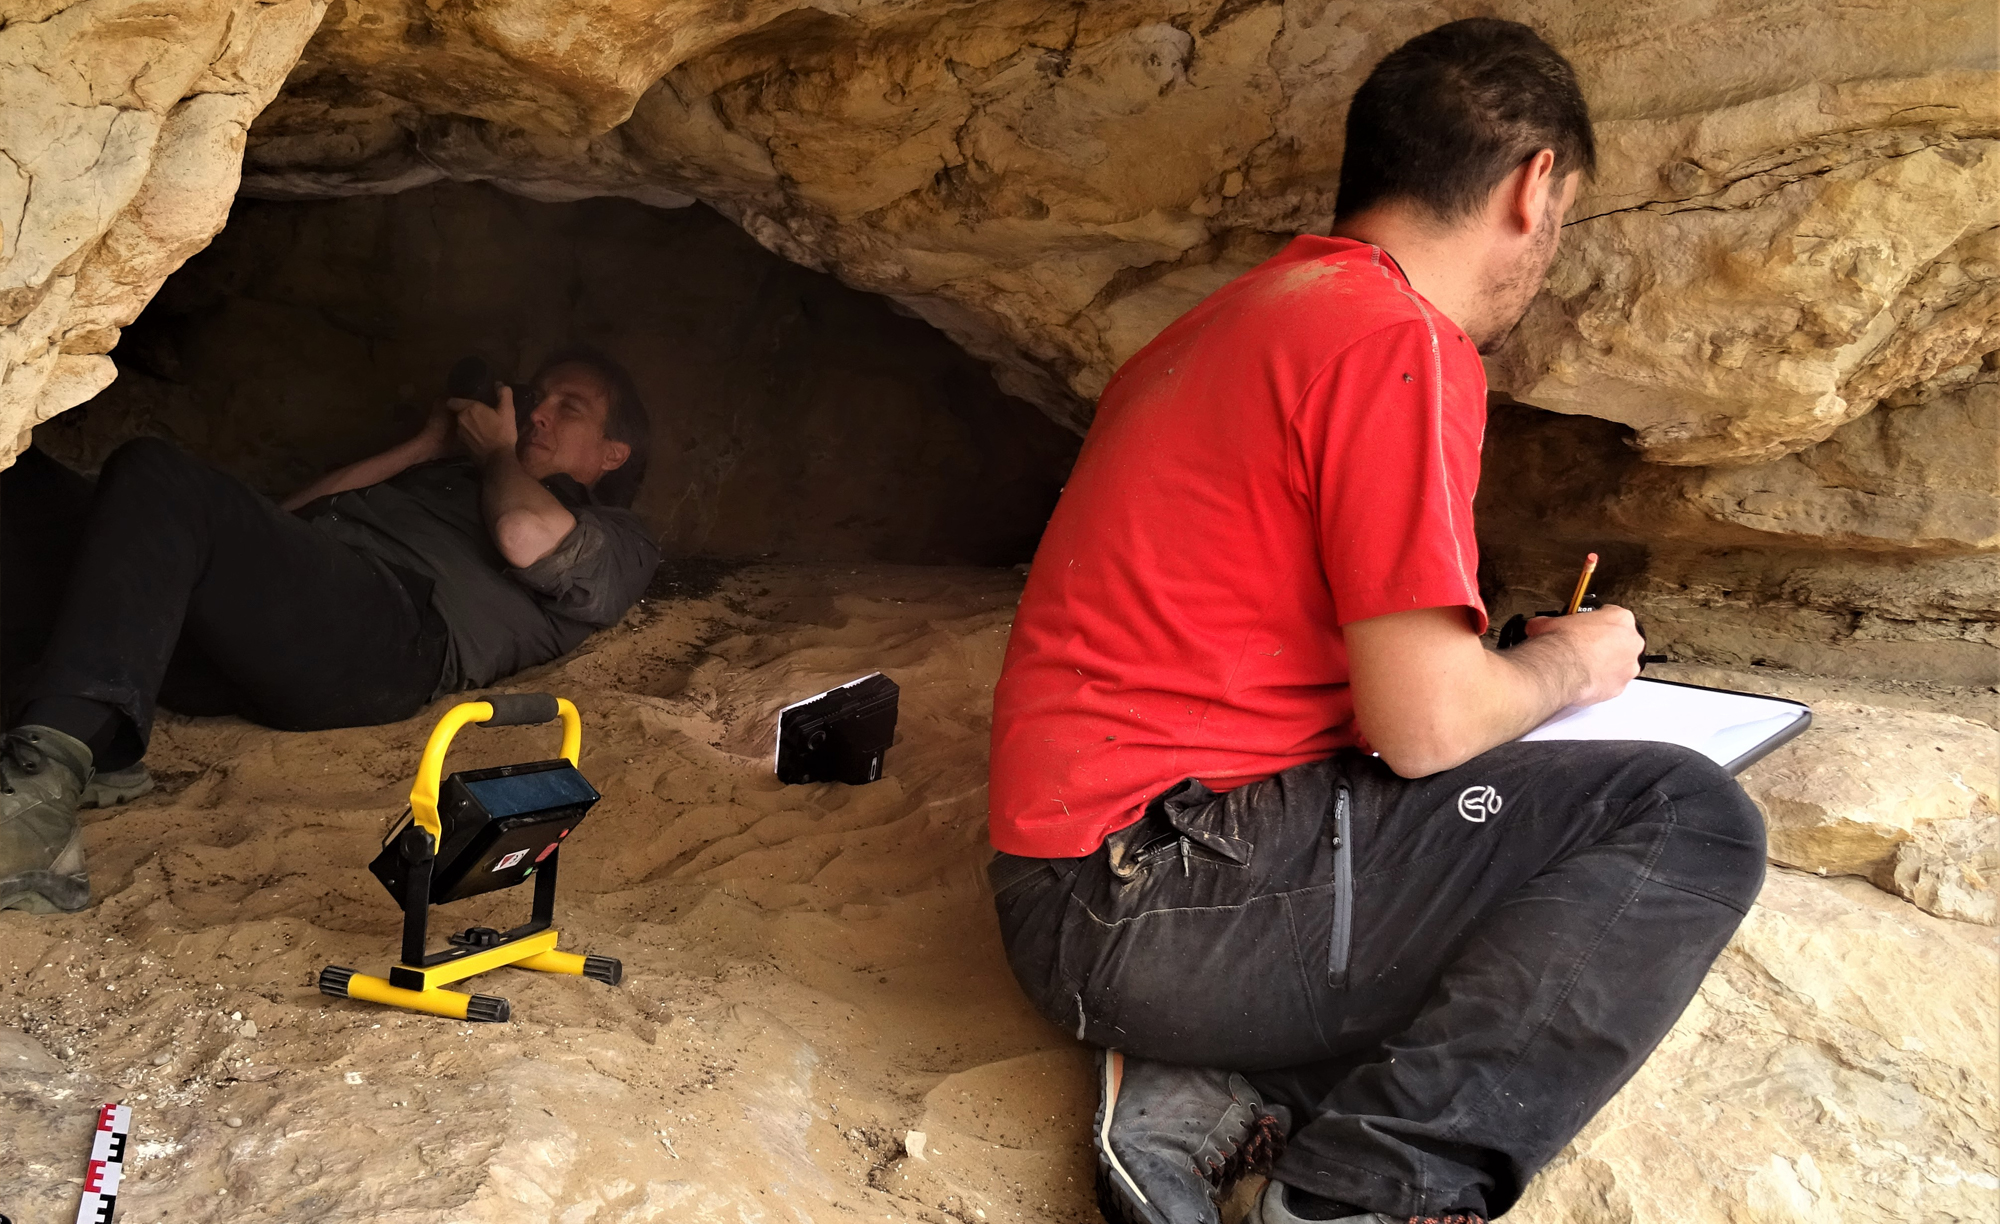 Colleagues Dr Aitor Ruiz-Redondo and Dr Juan F. Ruiz López recording rock art in one of the caves along the eastern flank